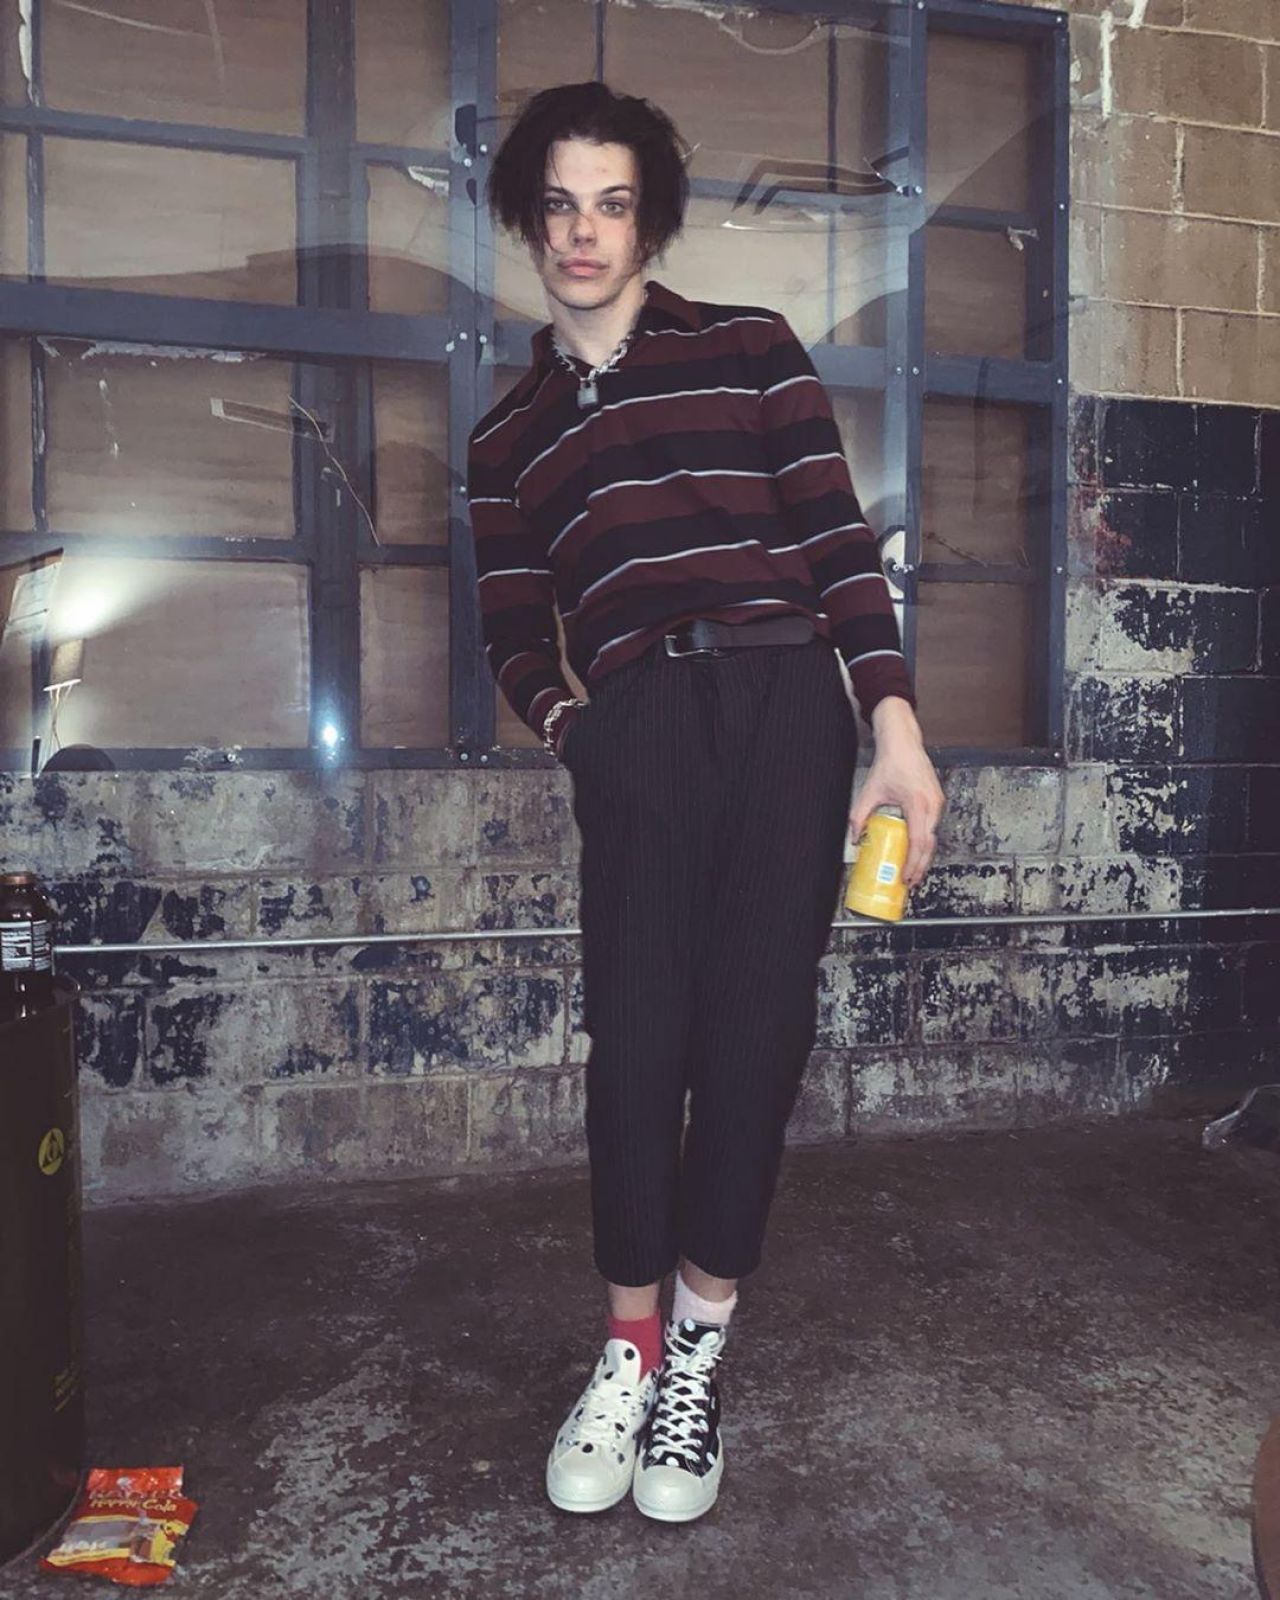 Striped Polo Shirt worn by Yungblud on his Instagram account @yungblud ...